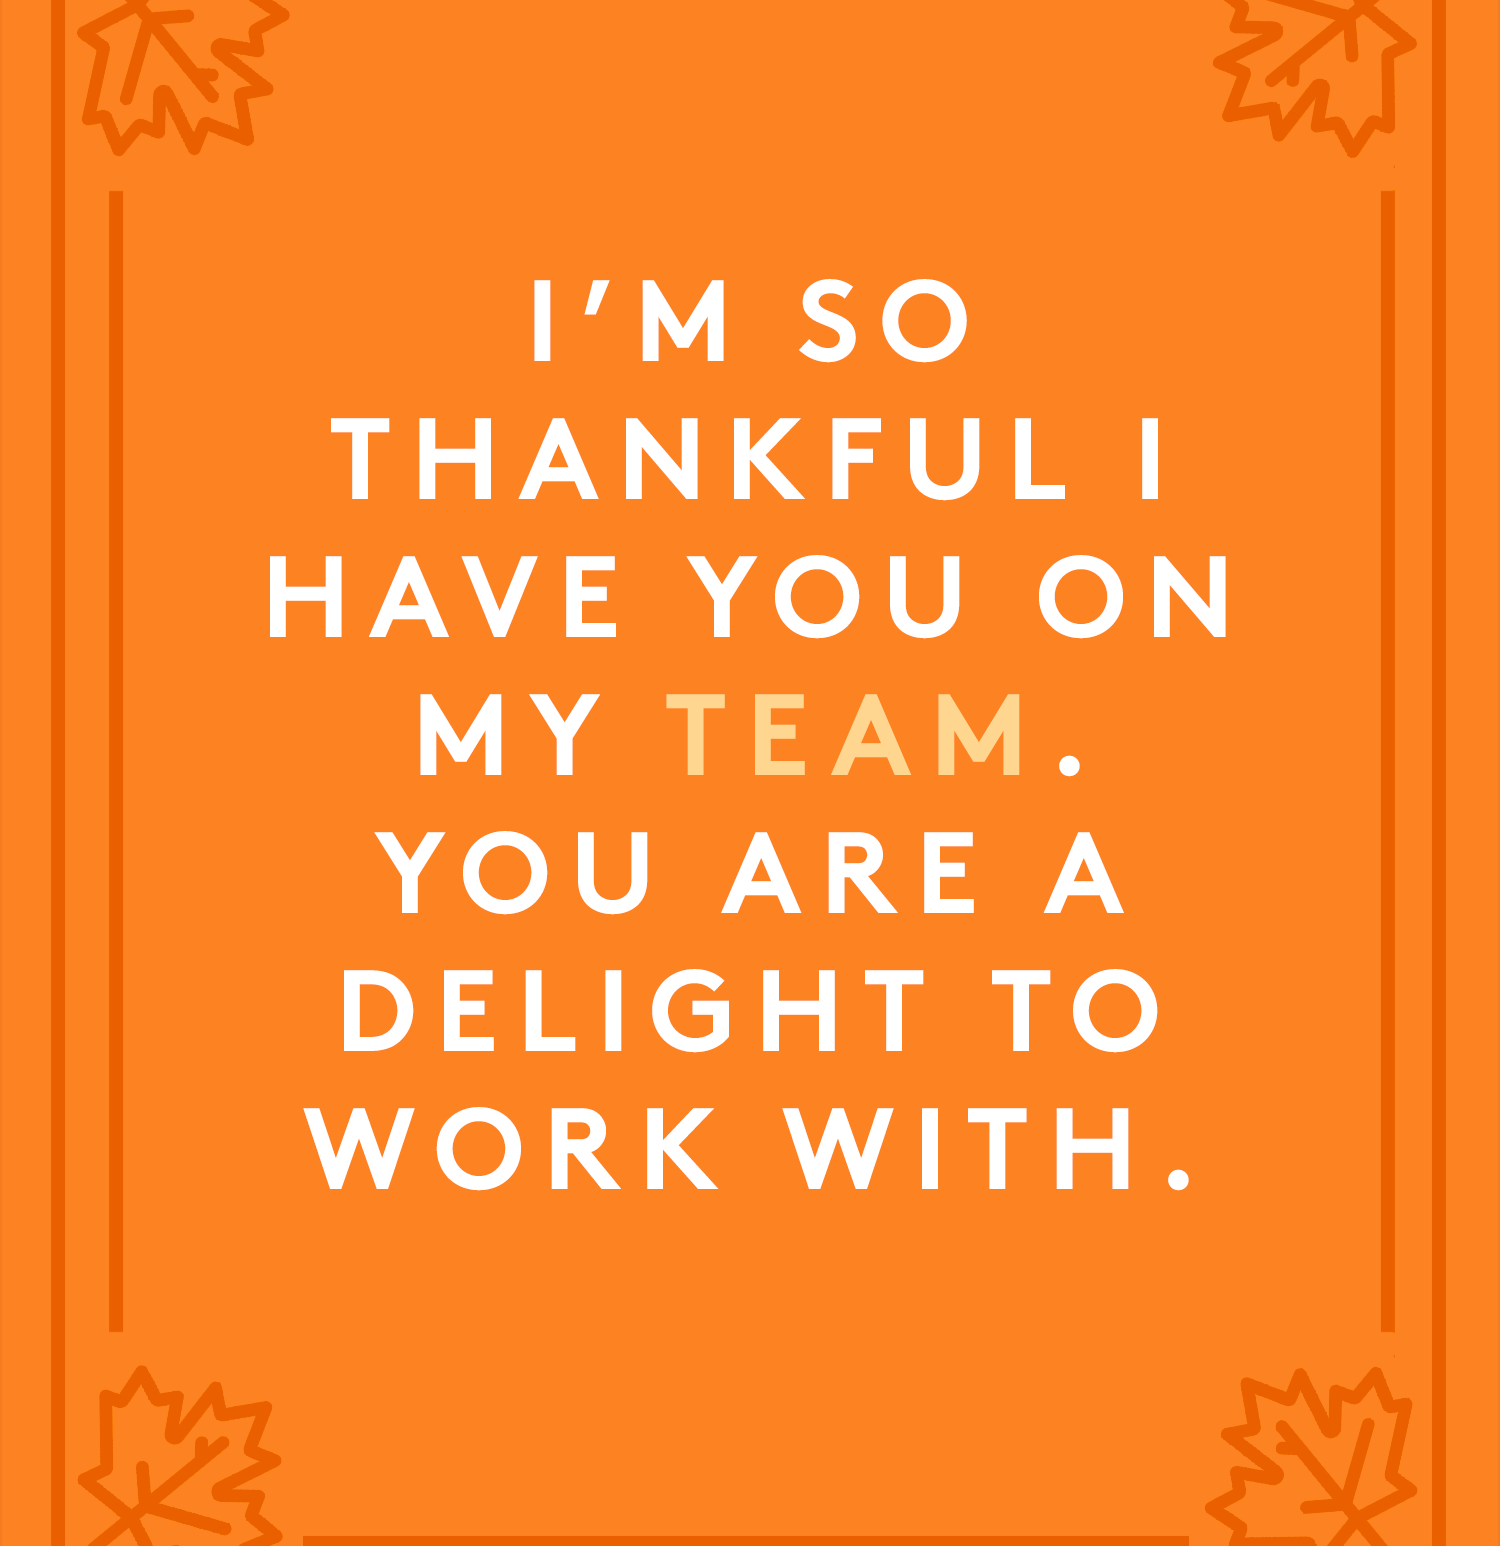 i’m so thankful i have you on my team. you are a delight to work with